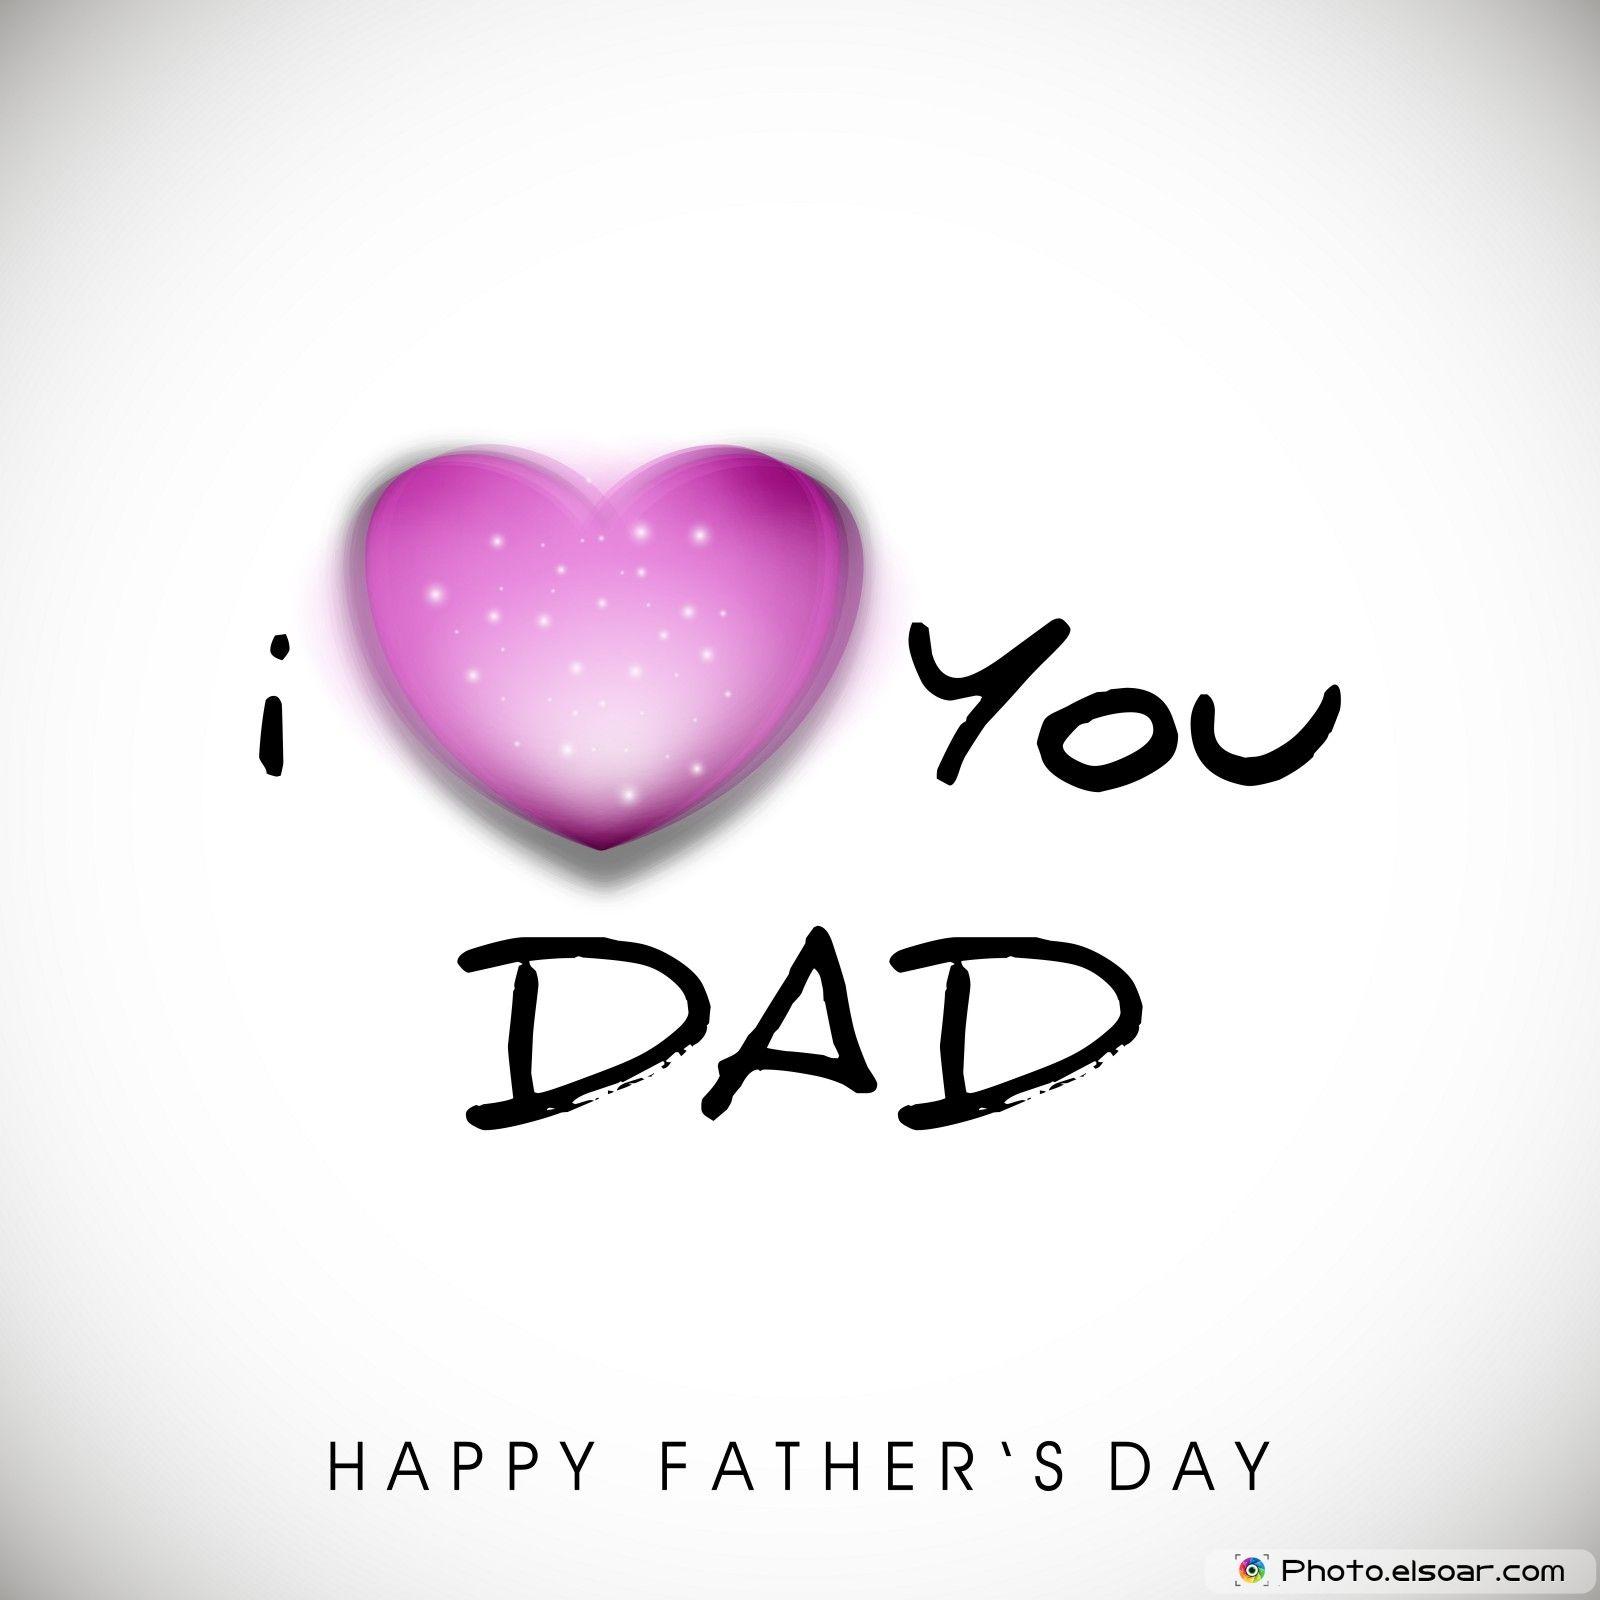 i love you dad images